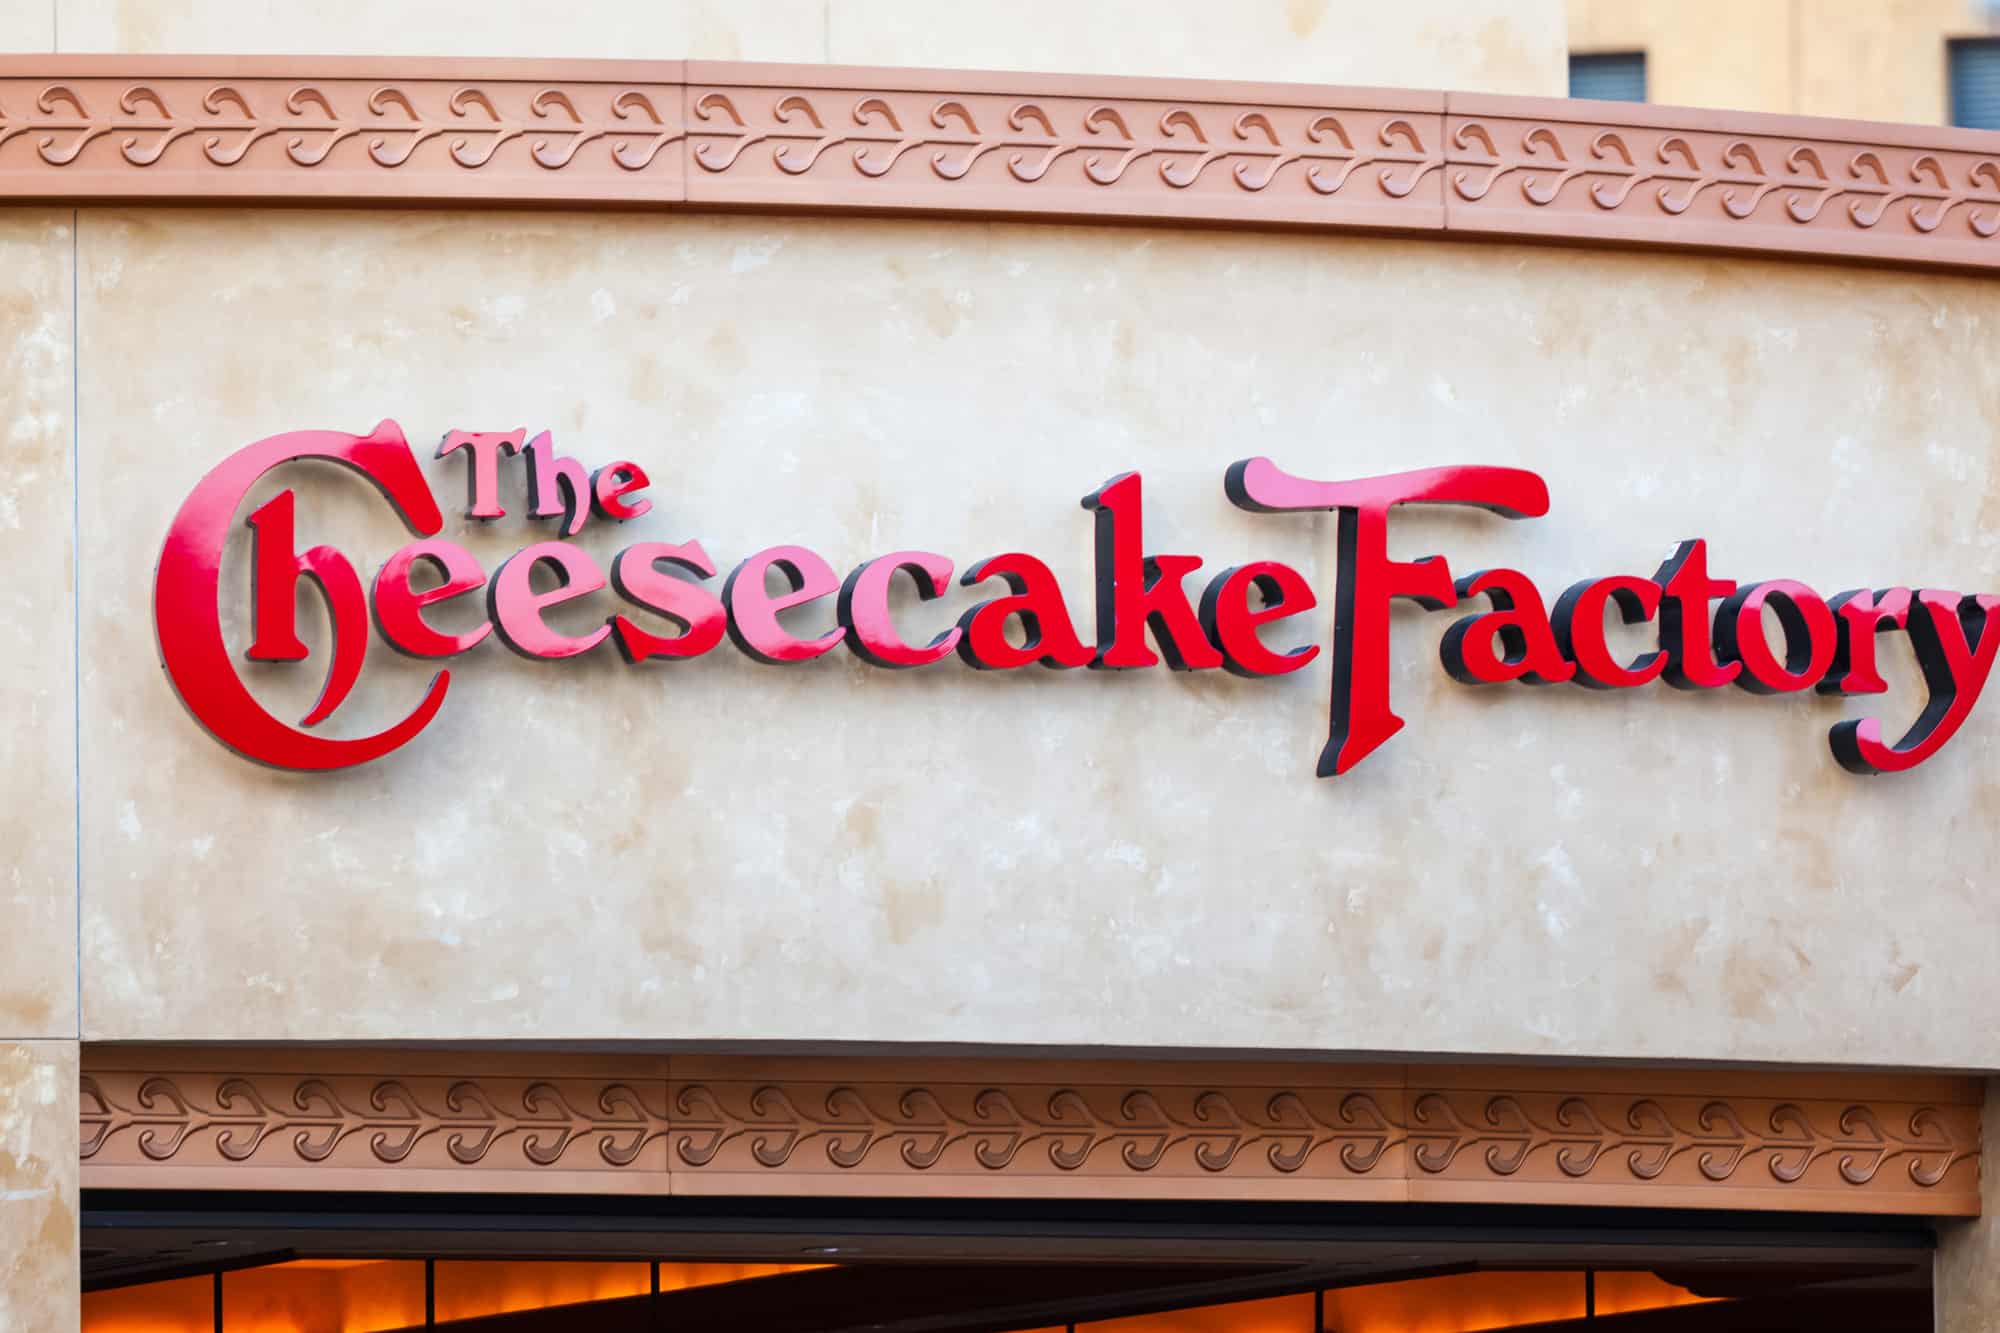 LAS VEGAS, NEVADA - August 22nd, 2016: The Cheesecake Factory Logo On Store Front Sign.